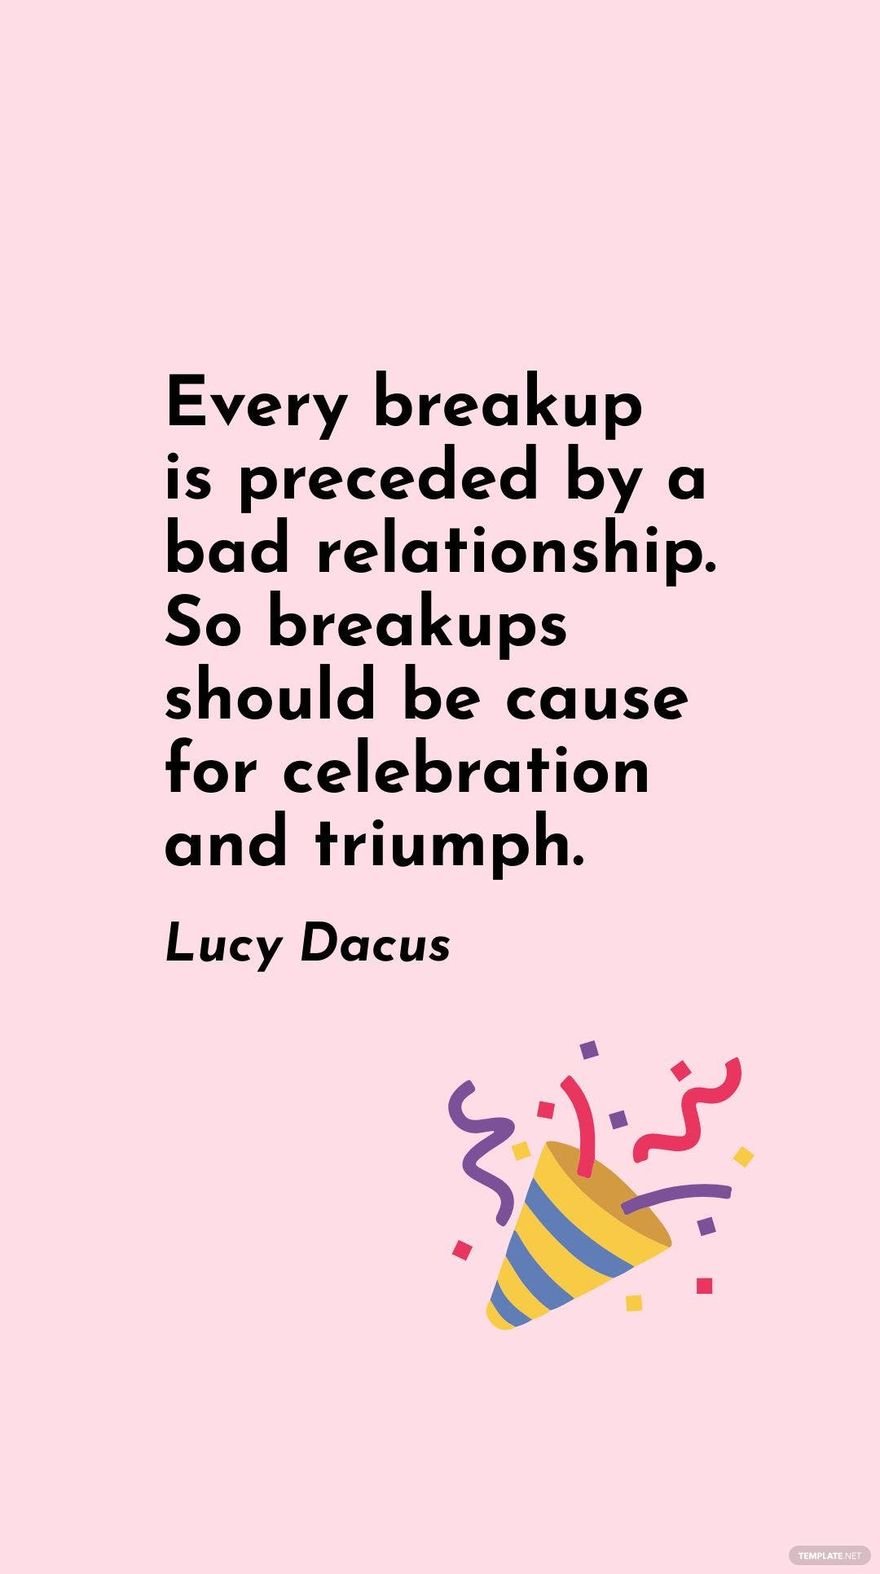 Lucy Dacus - Every breakup is preceded by a bad relationship. So breakups should be cause for celebration and triumph. in JPG